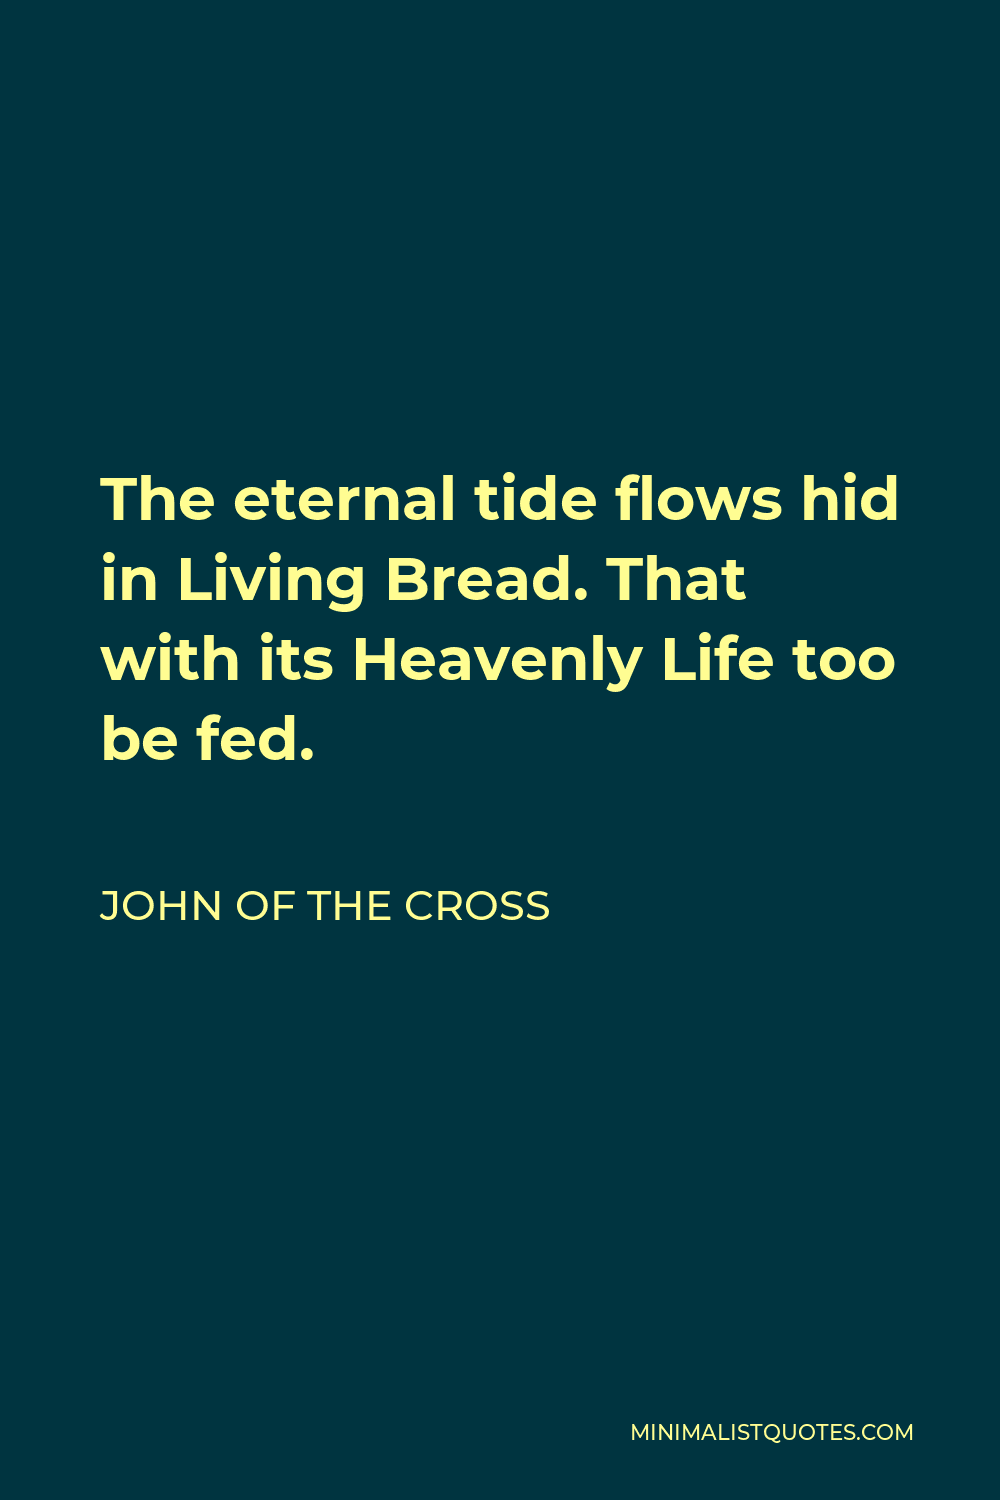 John of the Cross Quote - The eternal tide flows hid in Living Bread. That with its Heavenly Life too be fed.